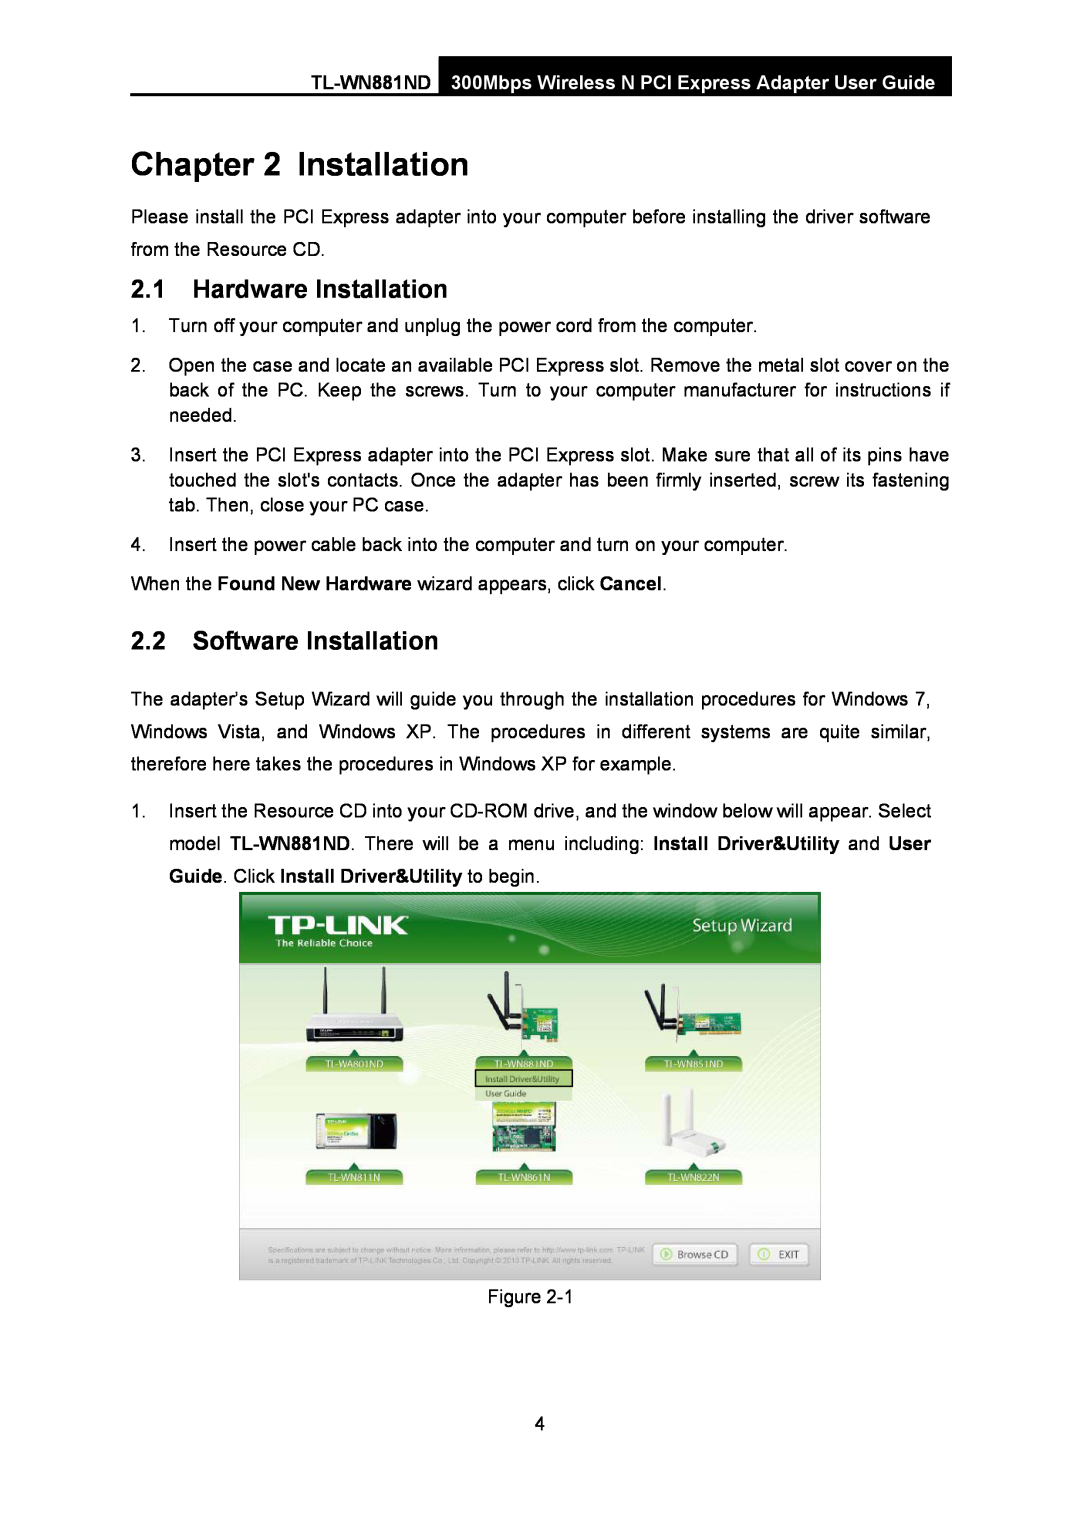 TP-Link TL-WN881ND manual Hardware Installation, Software Installation 